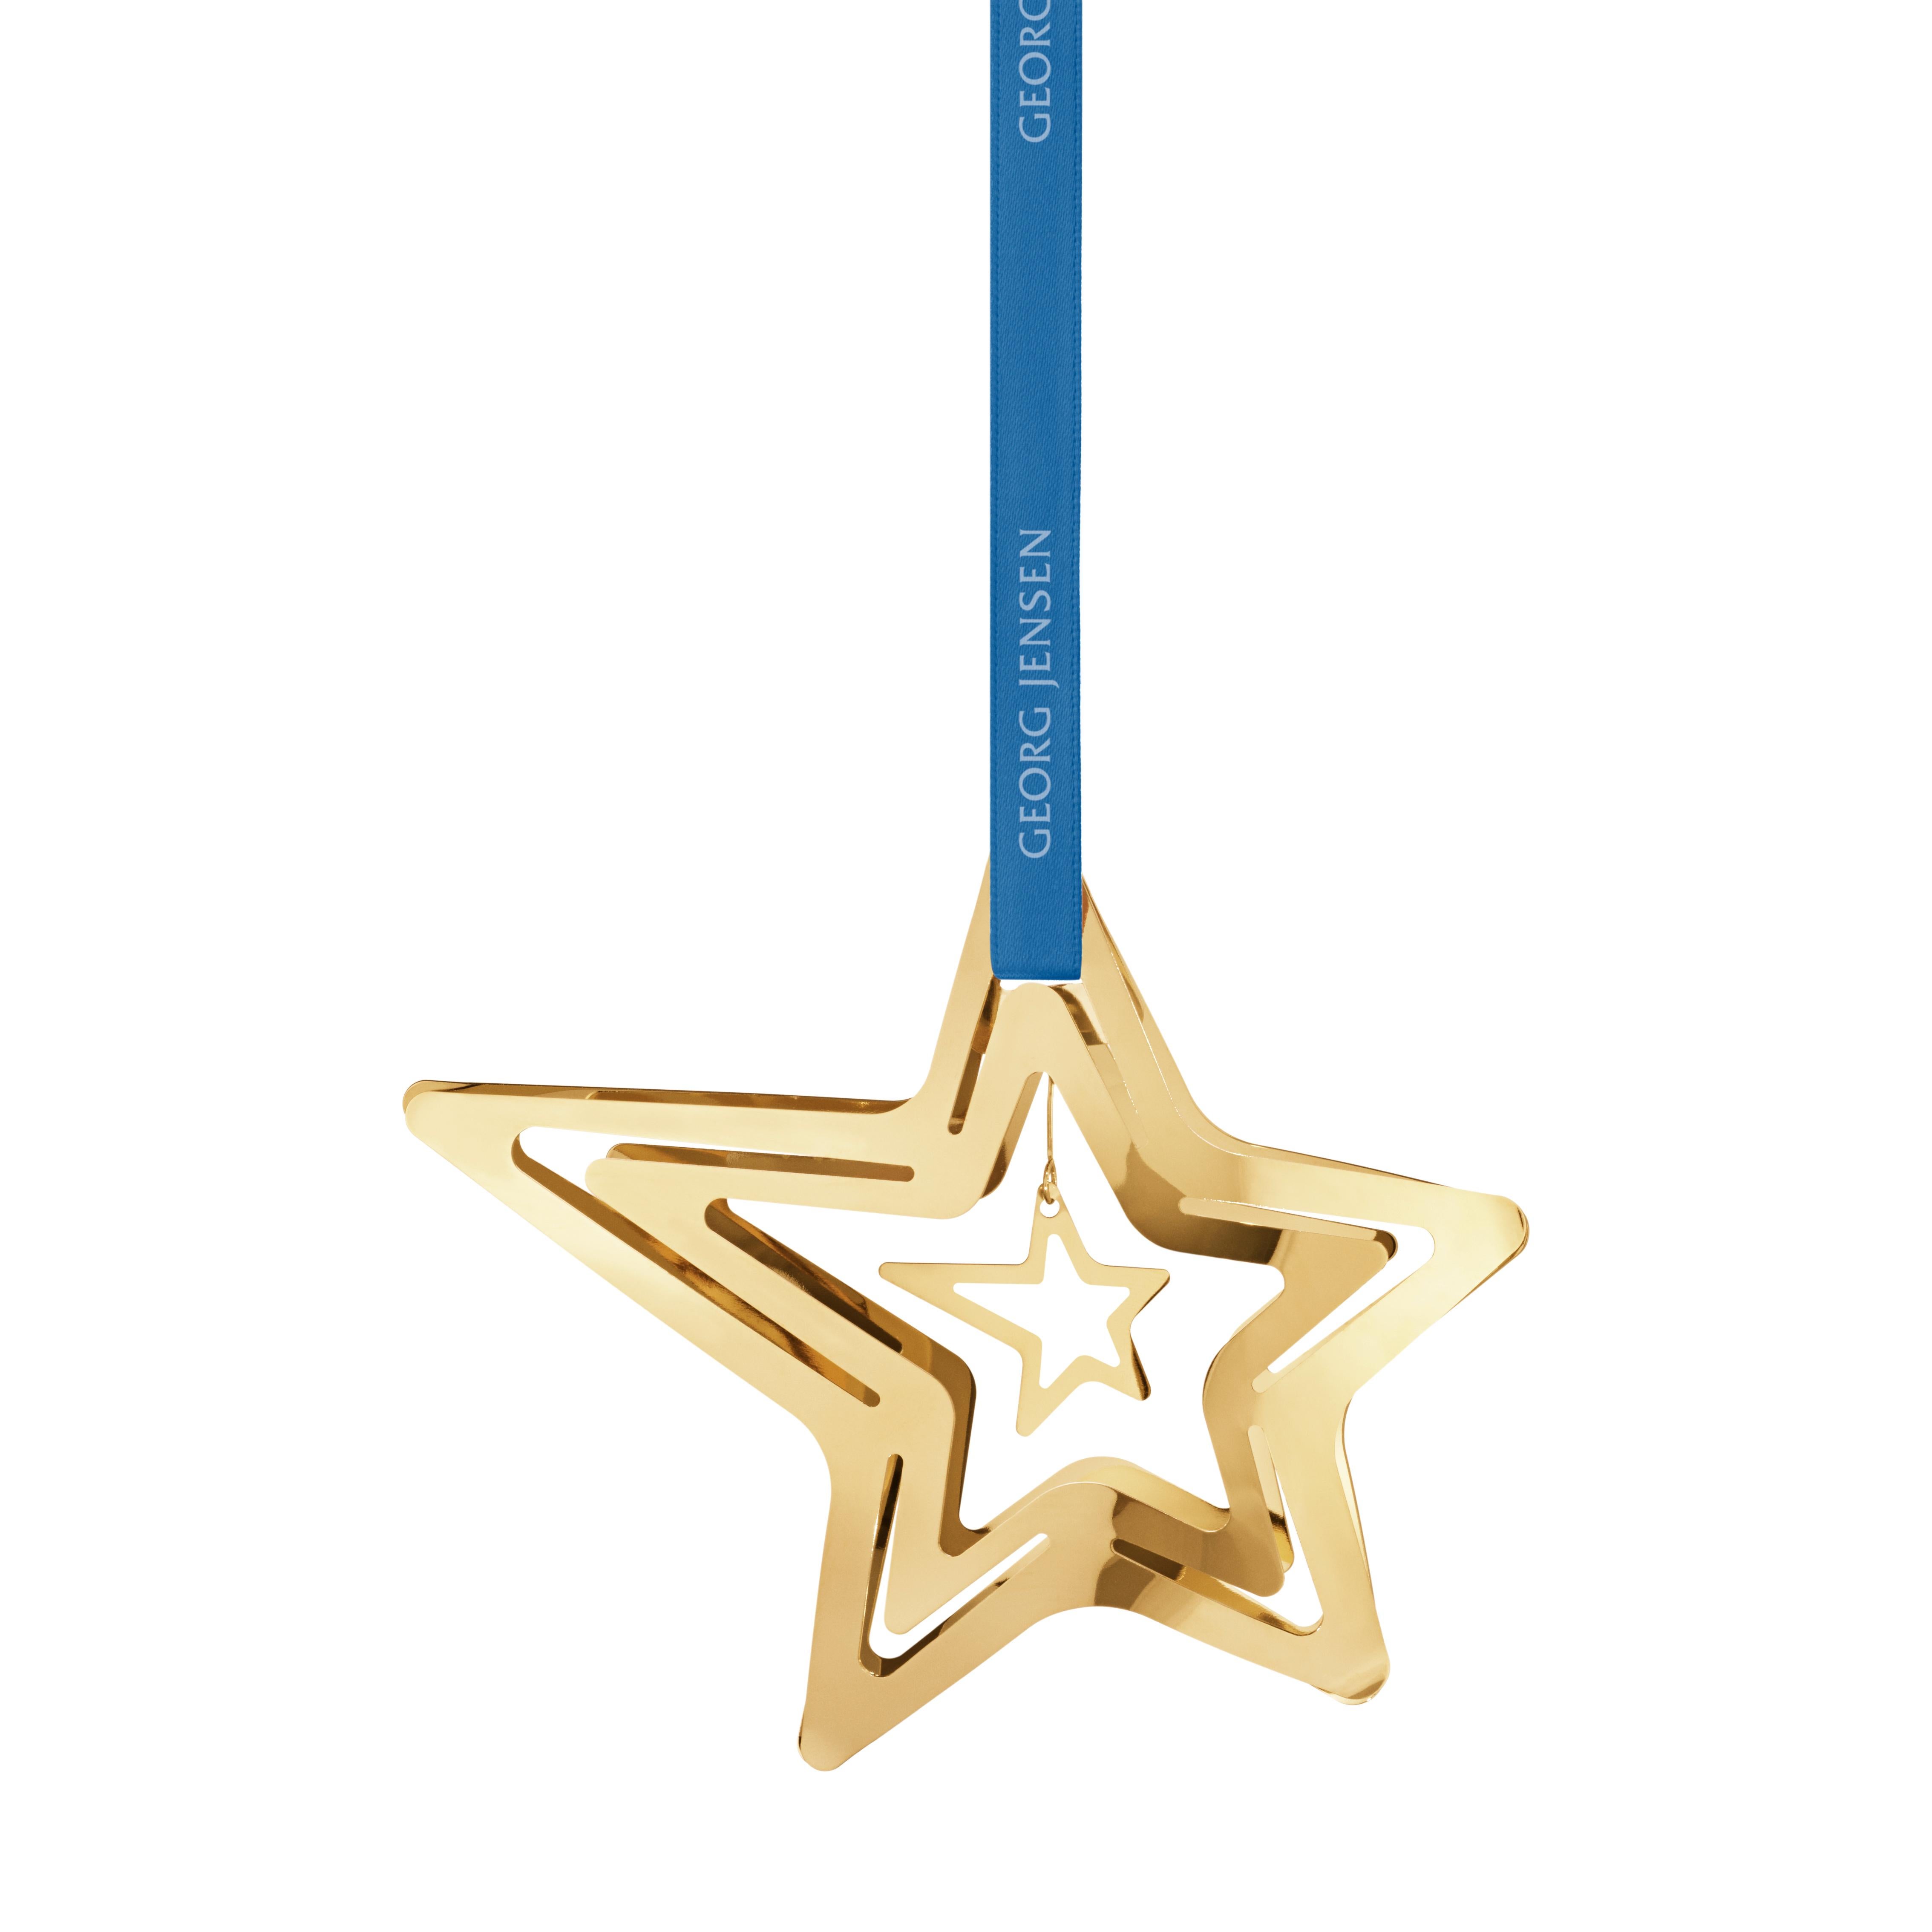 The magic of a crisp and clear winter night sky is captured in this 18 karat gold plated shooting star mobile. Part of Georg Jensen’s annual Christmas Collectibles collection, the star symbolizes the optimism and joy of the Christmas season as it